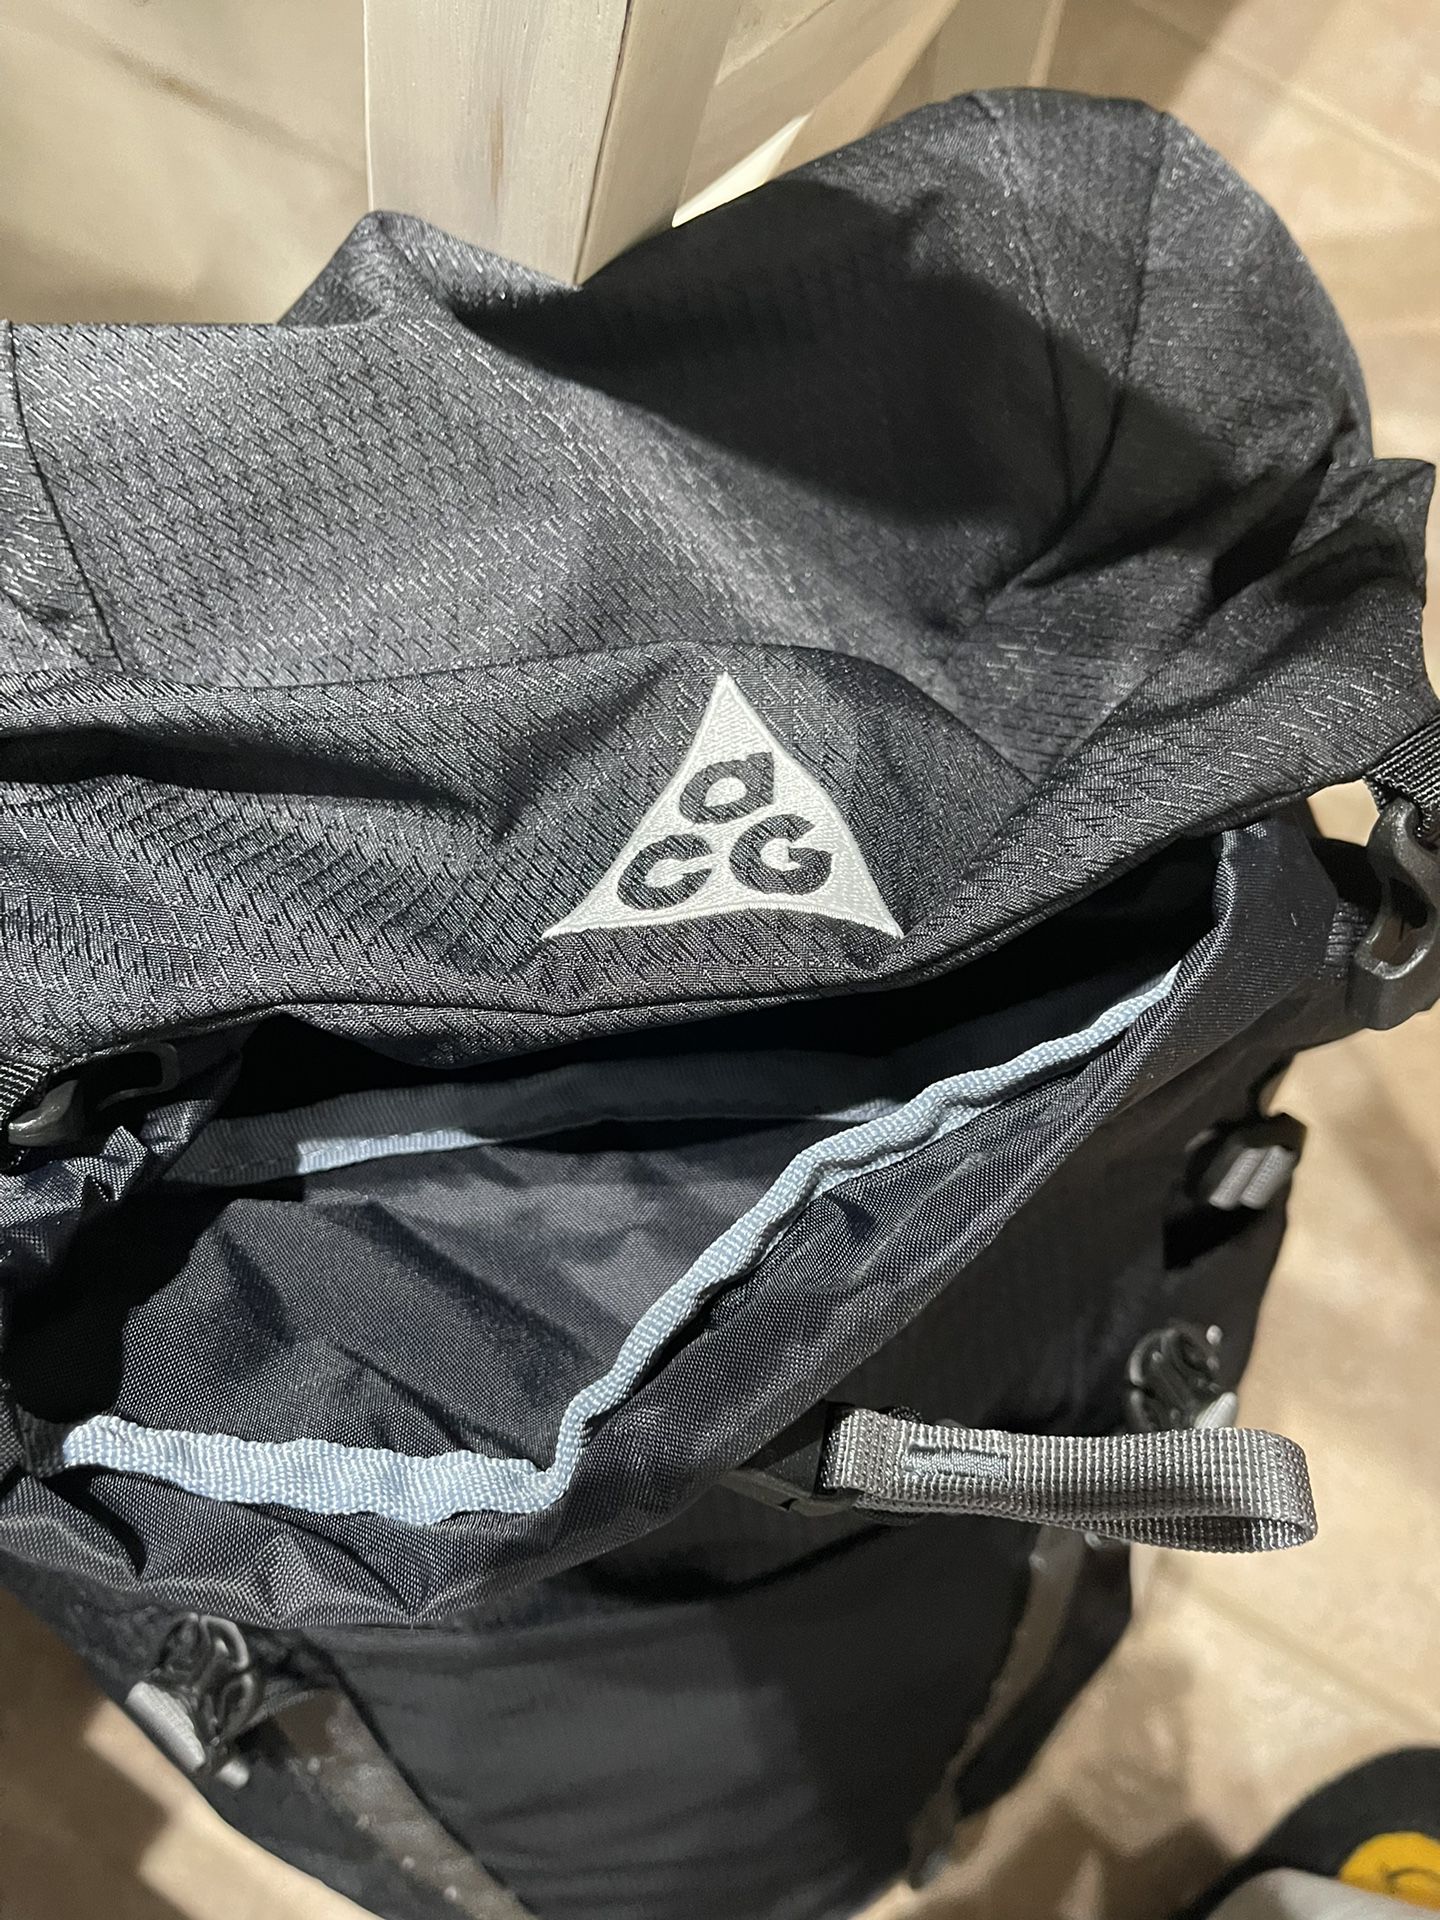 Mercedes Benz Backpack for Sale in Richmond, CA - OfferUp